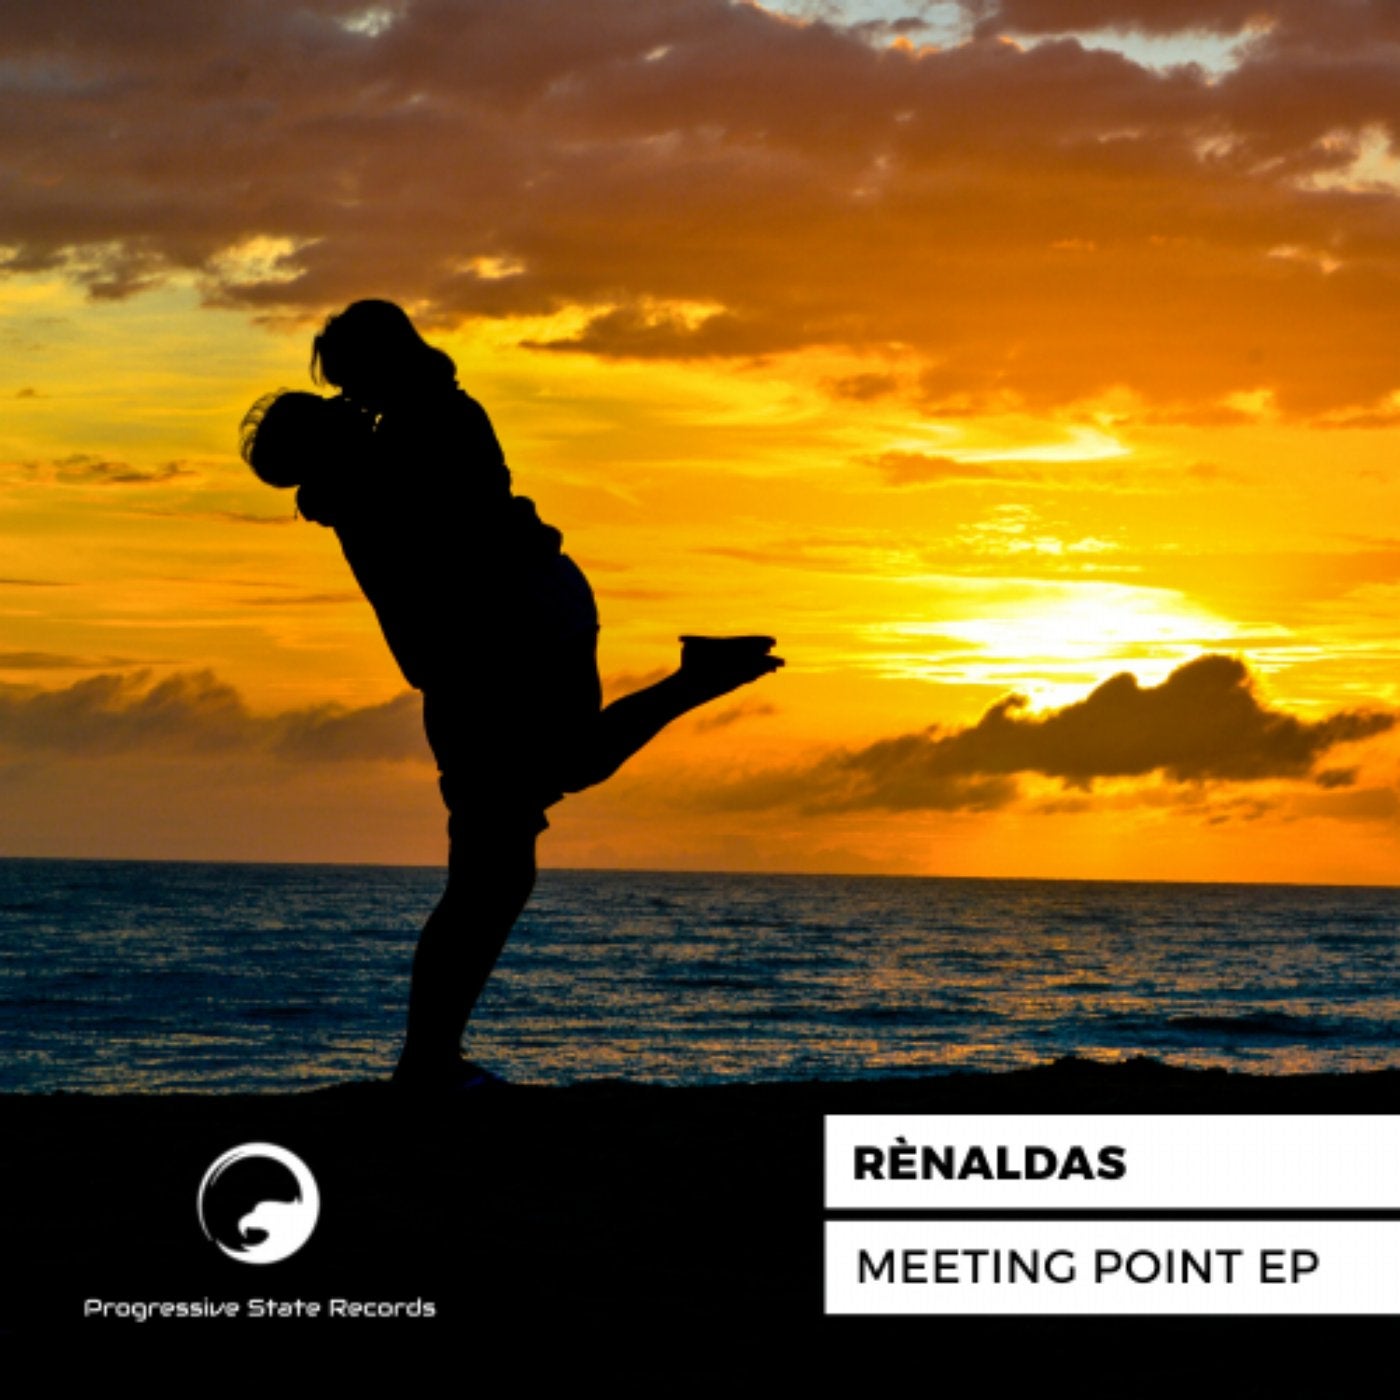 Meeting Point EP